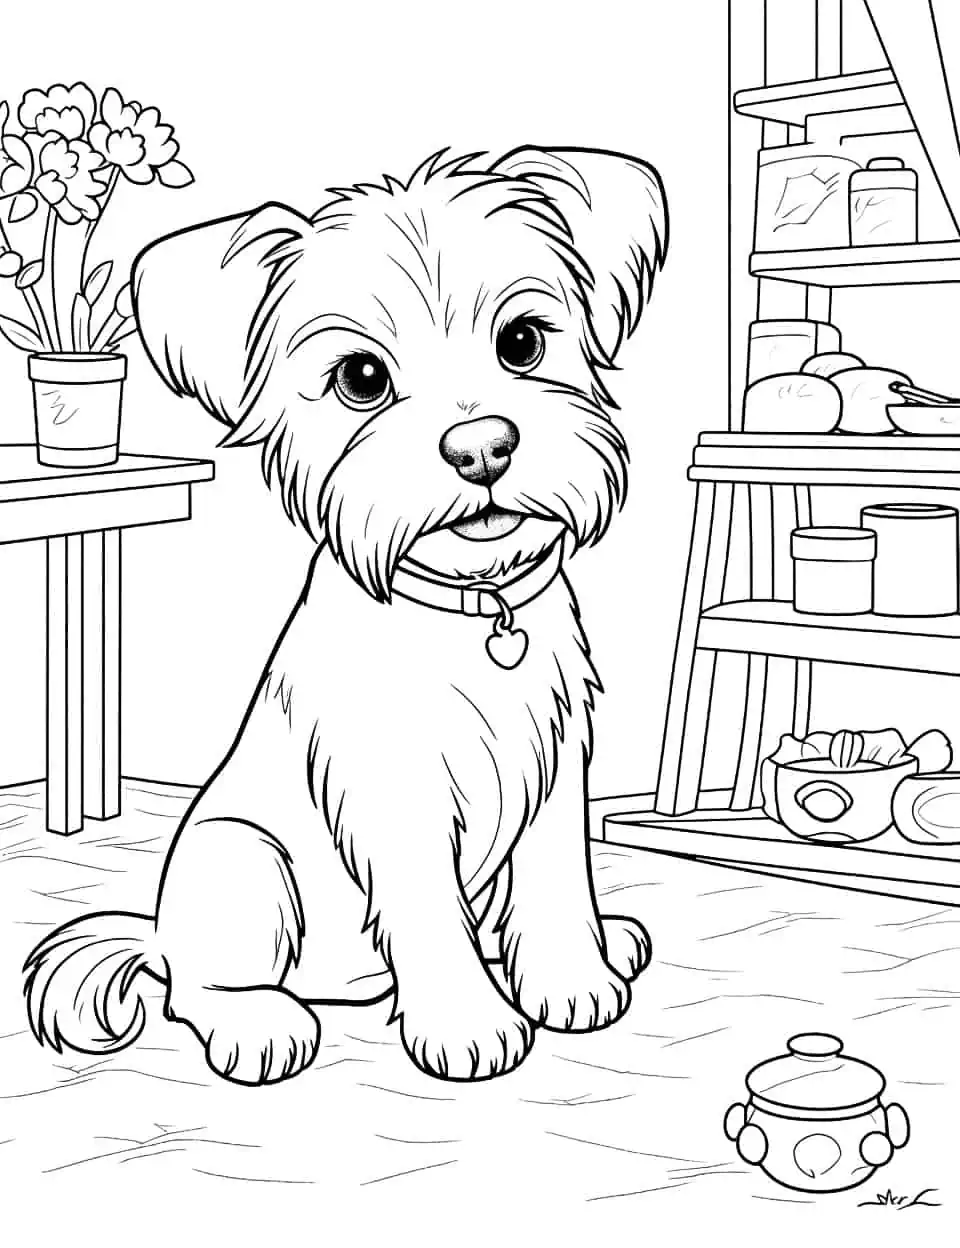 Yorkie in the Kitchen Coloring Page - A pampered and groomed Yorkie sitting in the kitchen waiting for dinner.